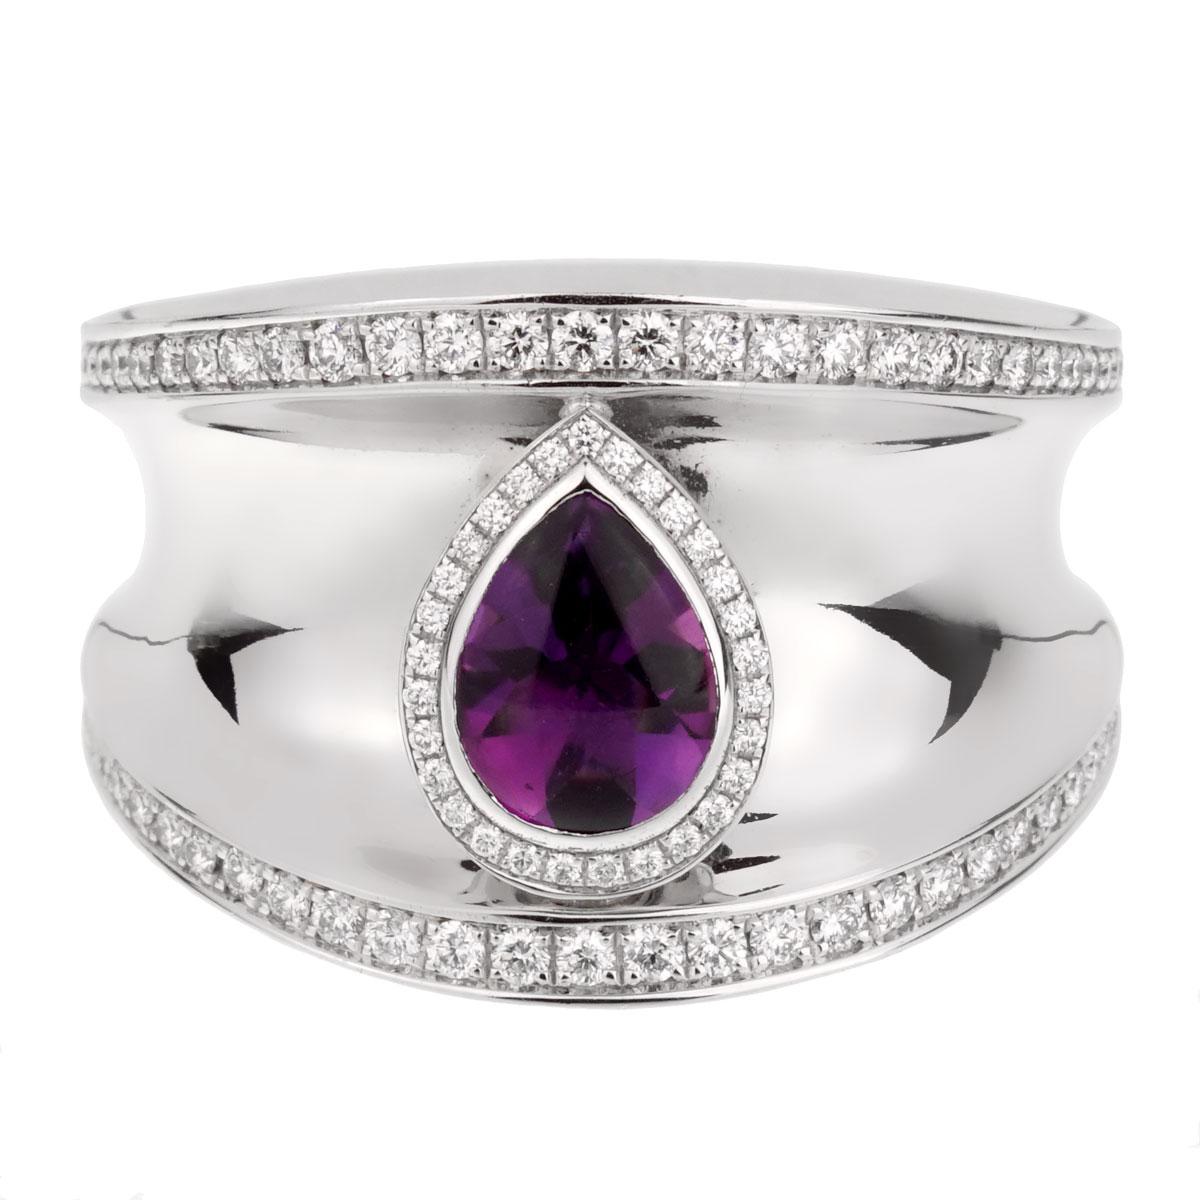 A magnificent Chopard diamond and amethyst ring from the Imperiale collection, the ring showcases 1 Amethyst bezel set adorned with round brilliant cut diamonds. Both edges of the Chopard band are also lined with round brilliant cut diamonds. The